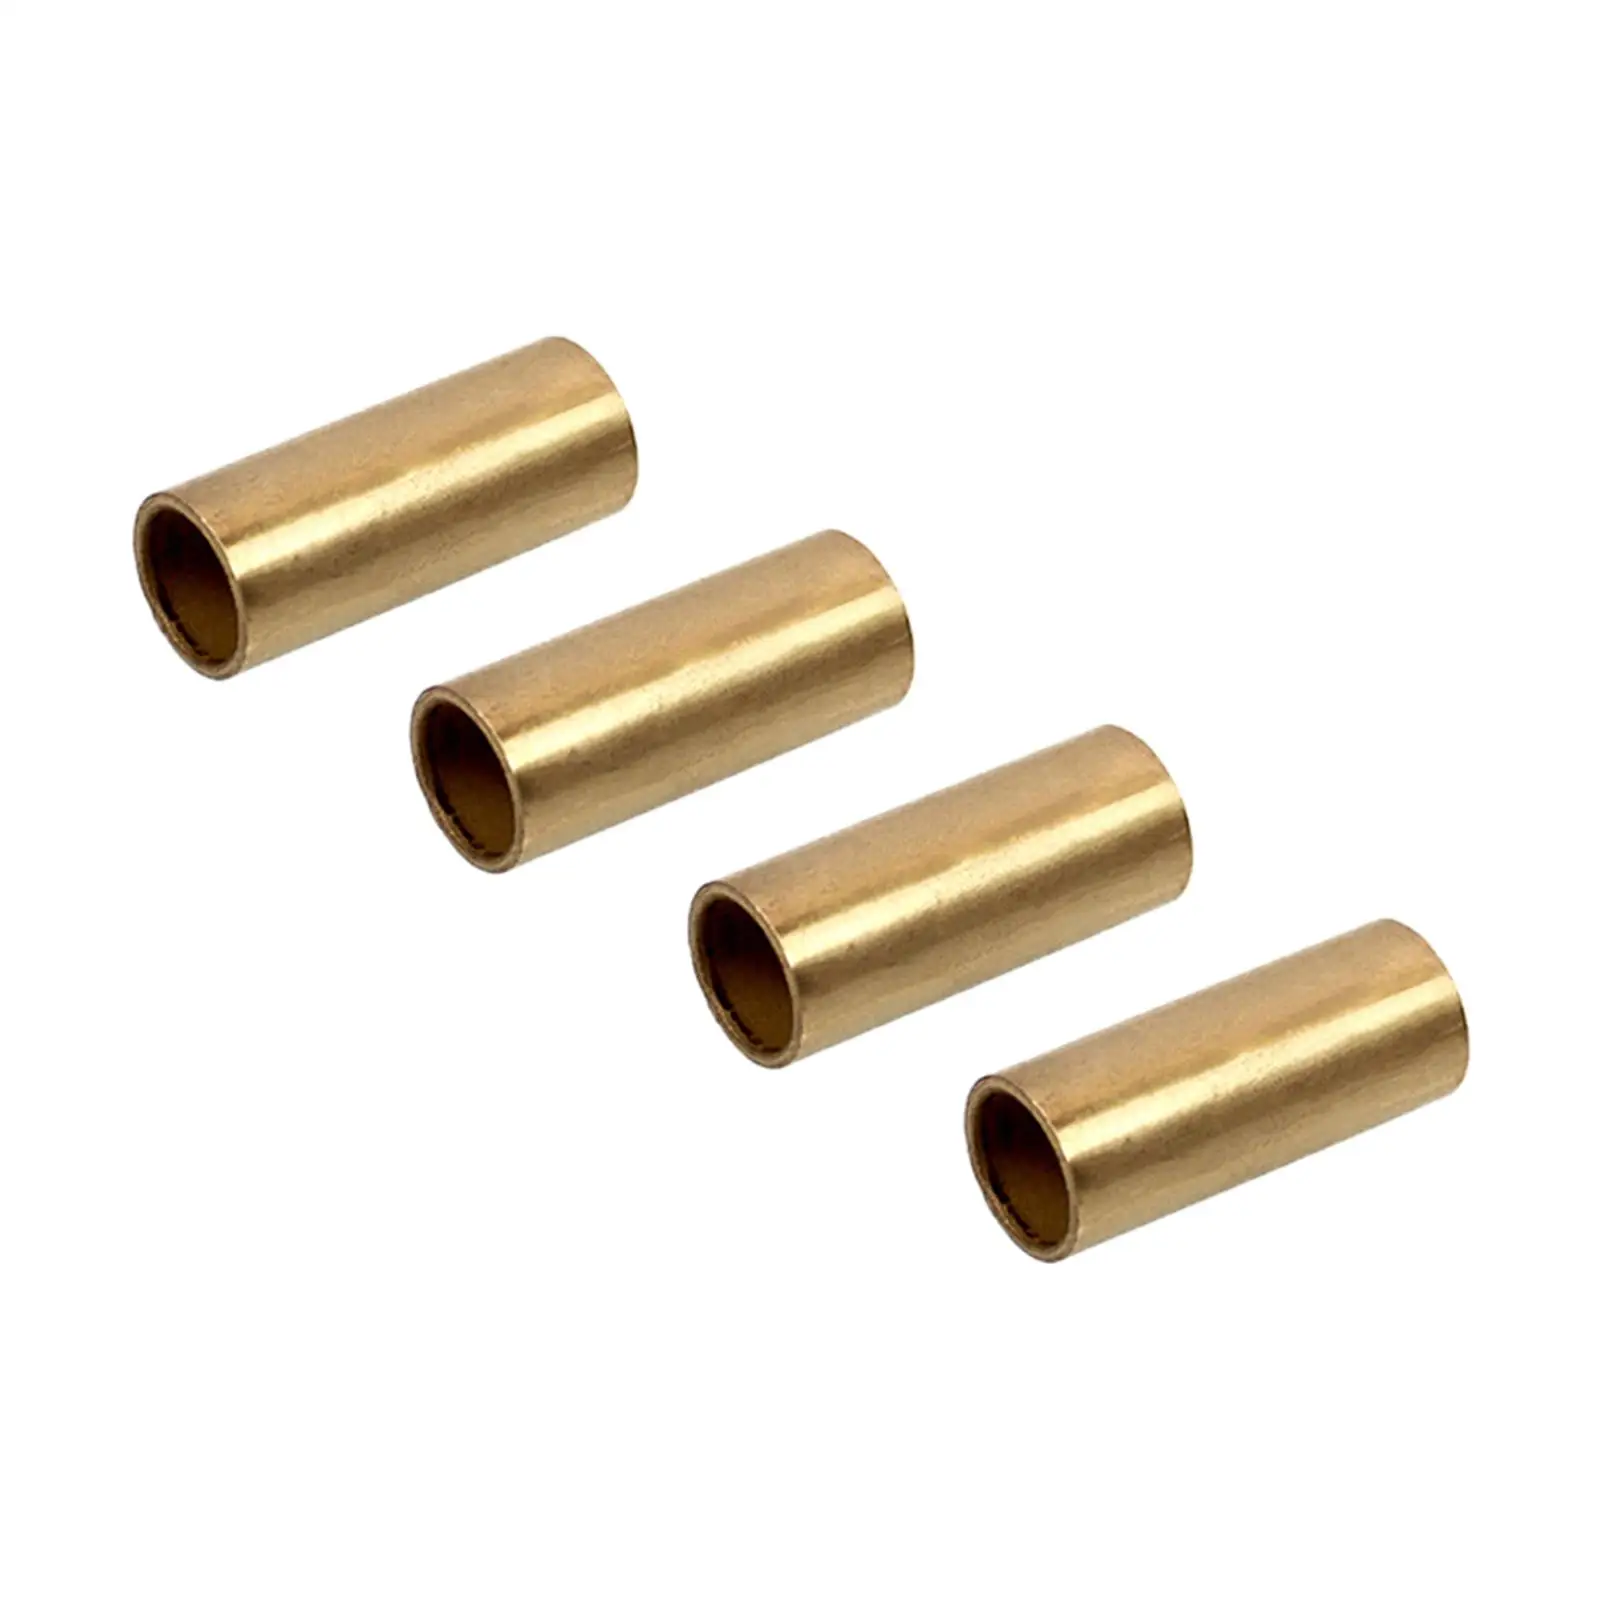 4 Pieces Bronze Leaf Spring Shackle Bushings K71-291-00 for Dexter Axle